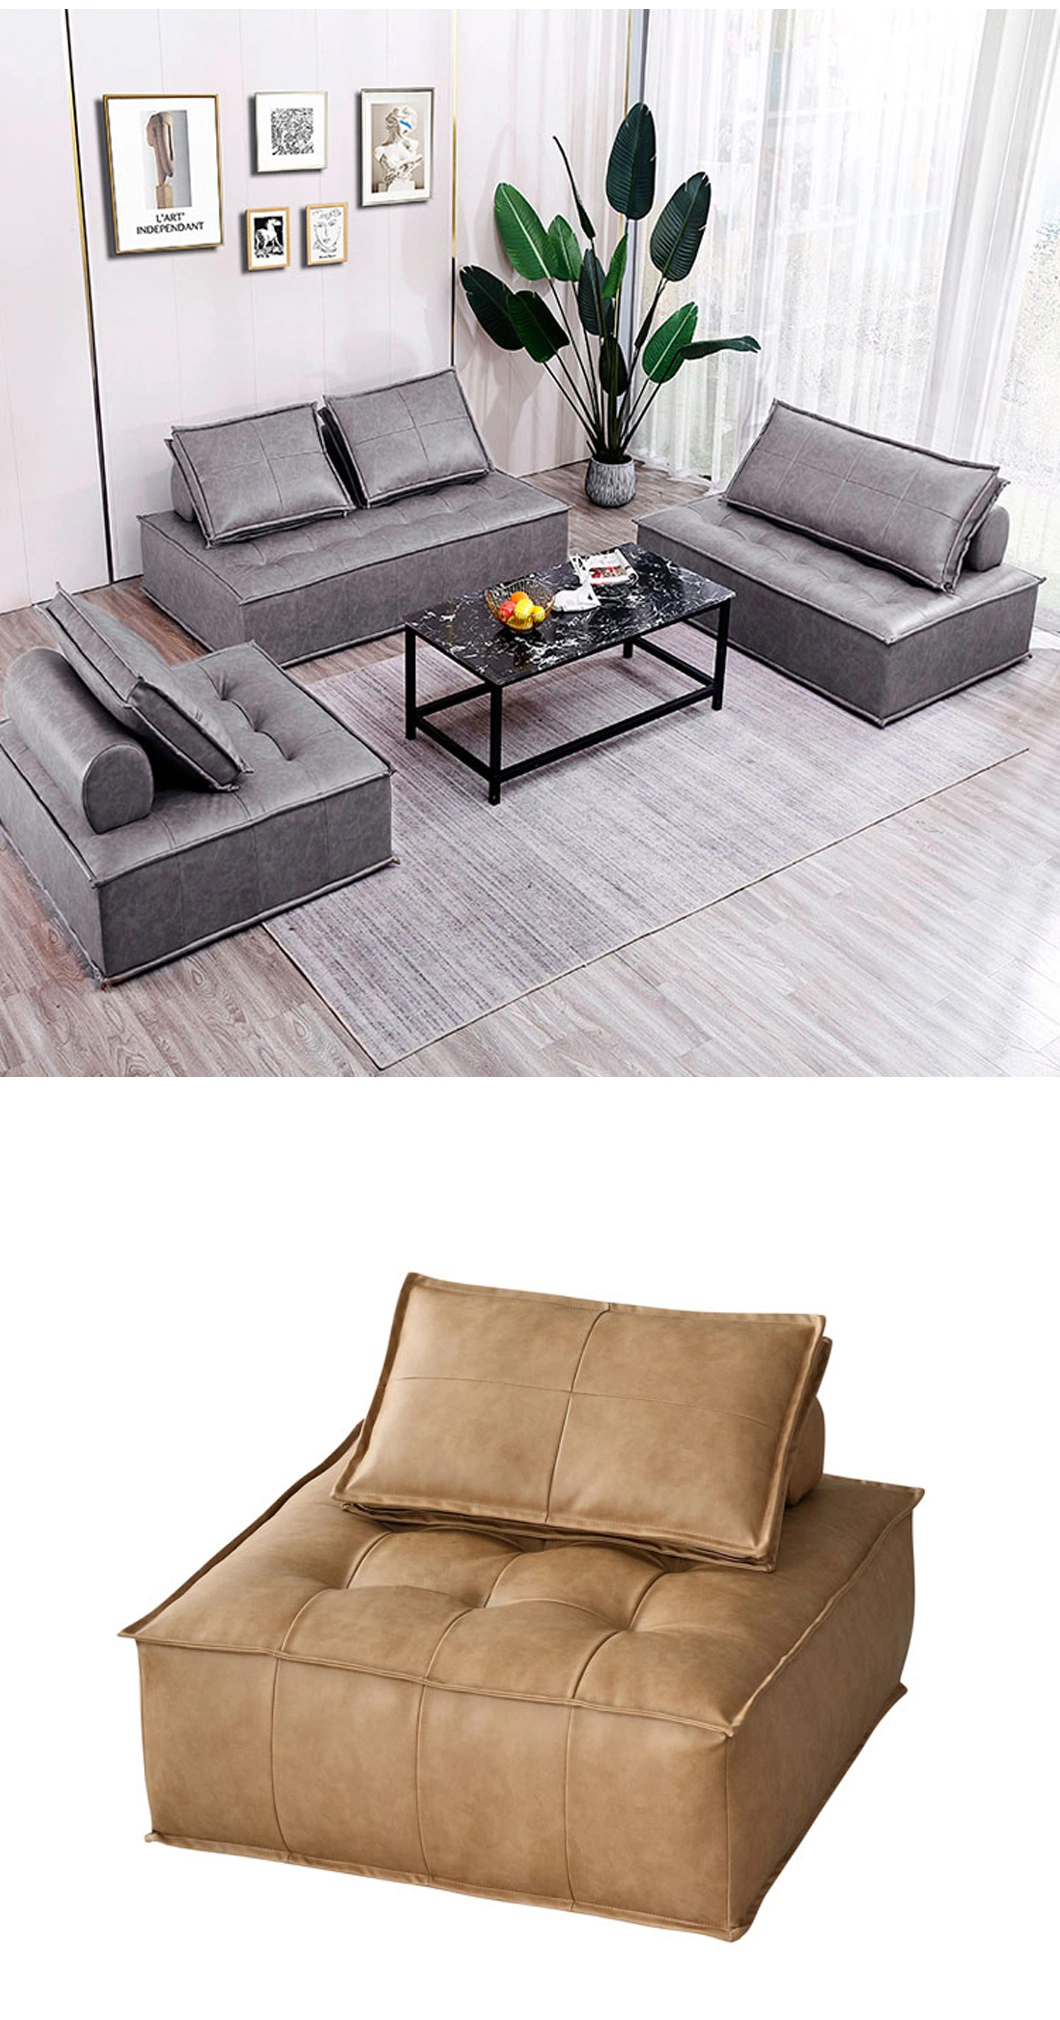 Living Room Sectional Couch Sofa Set with Leather Bedroom Sofa